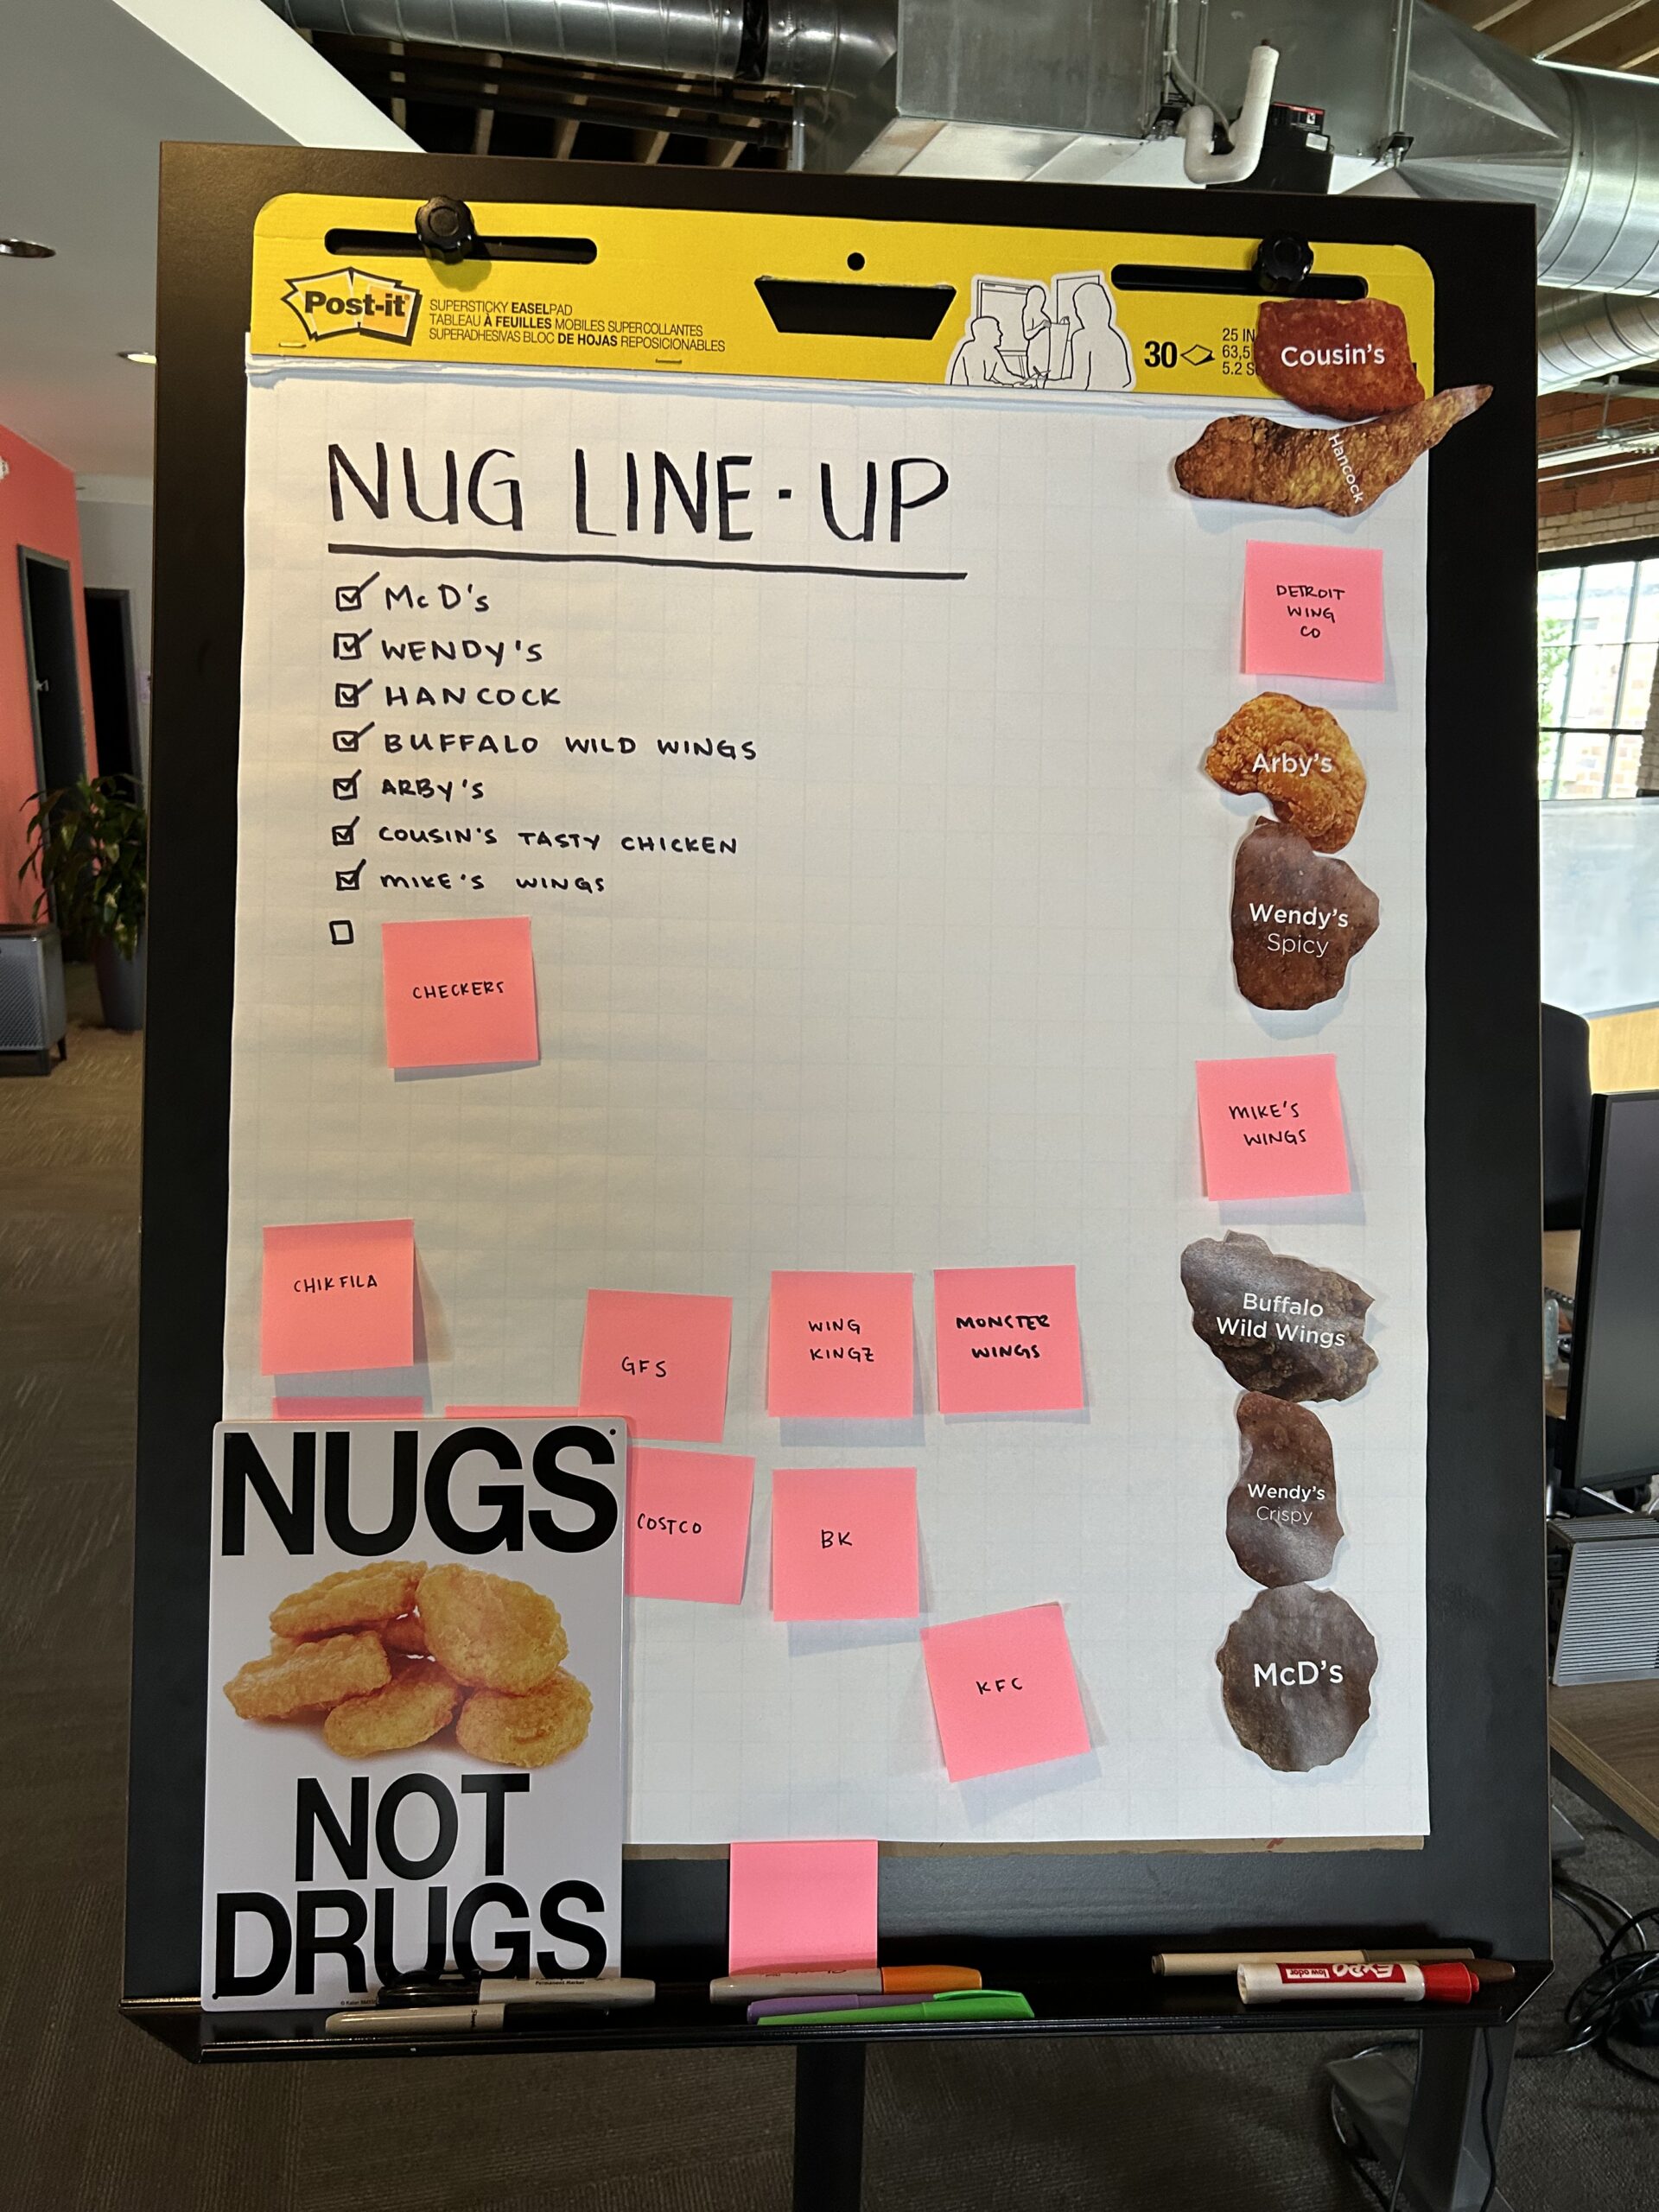 Chicken nugget tracking board. The board shows the current rankings and future tasting ideas.